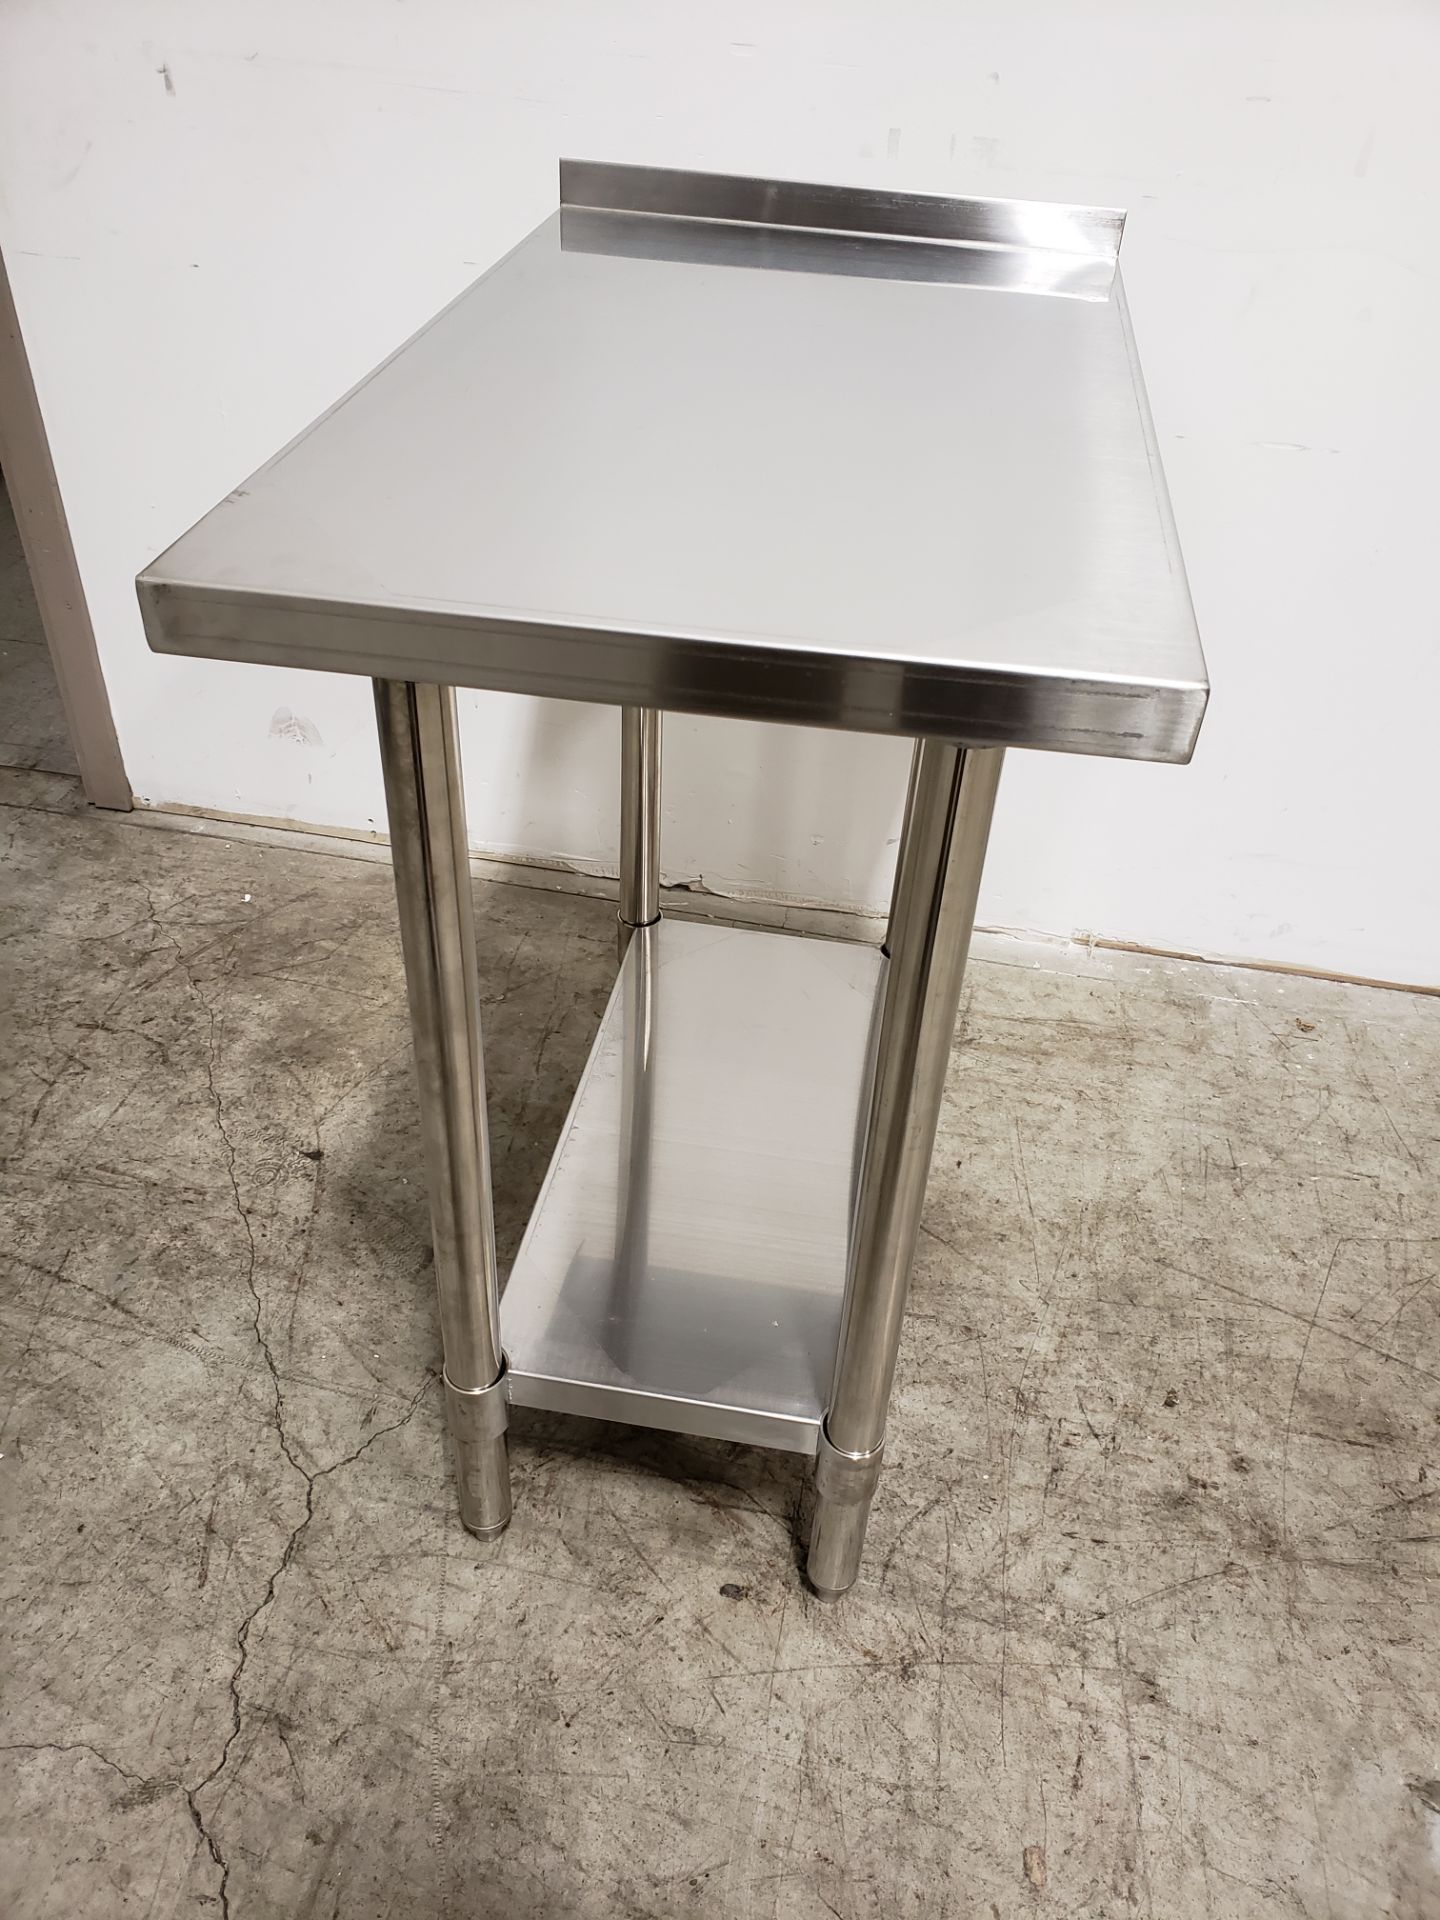 18" x 30" All Stainless Work Table with 1.5" Back Splash - 34" high